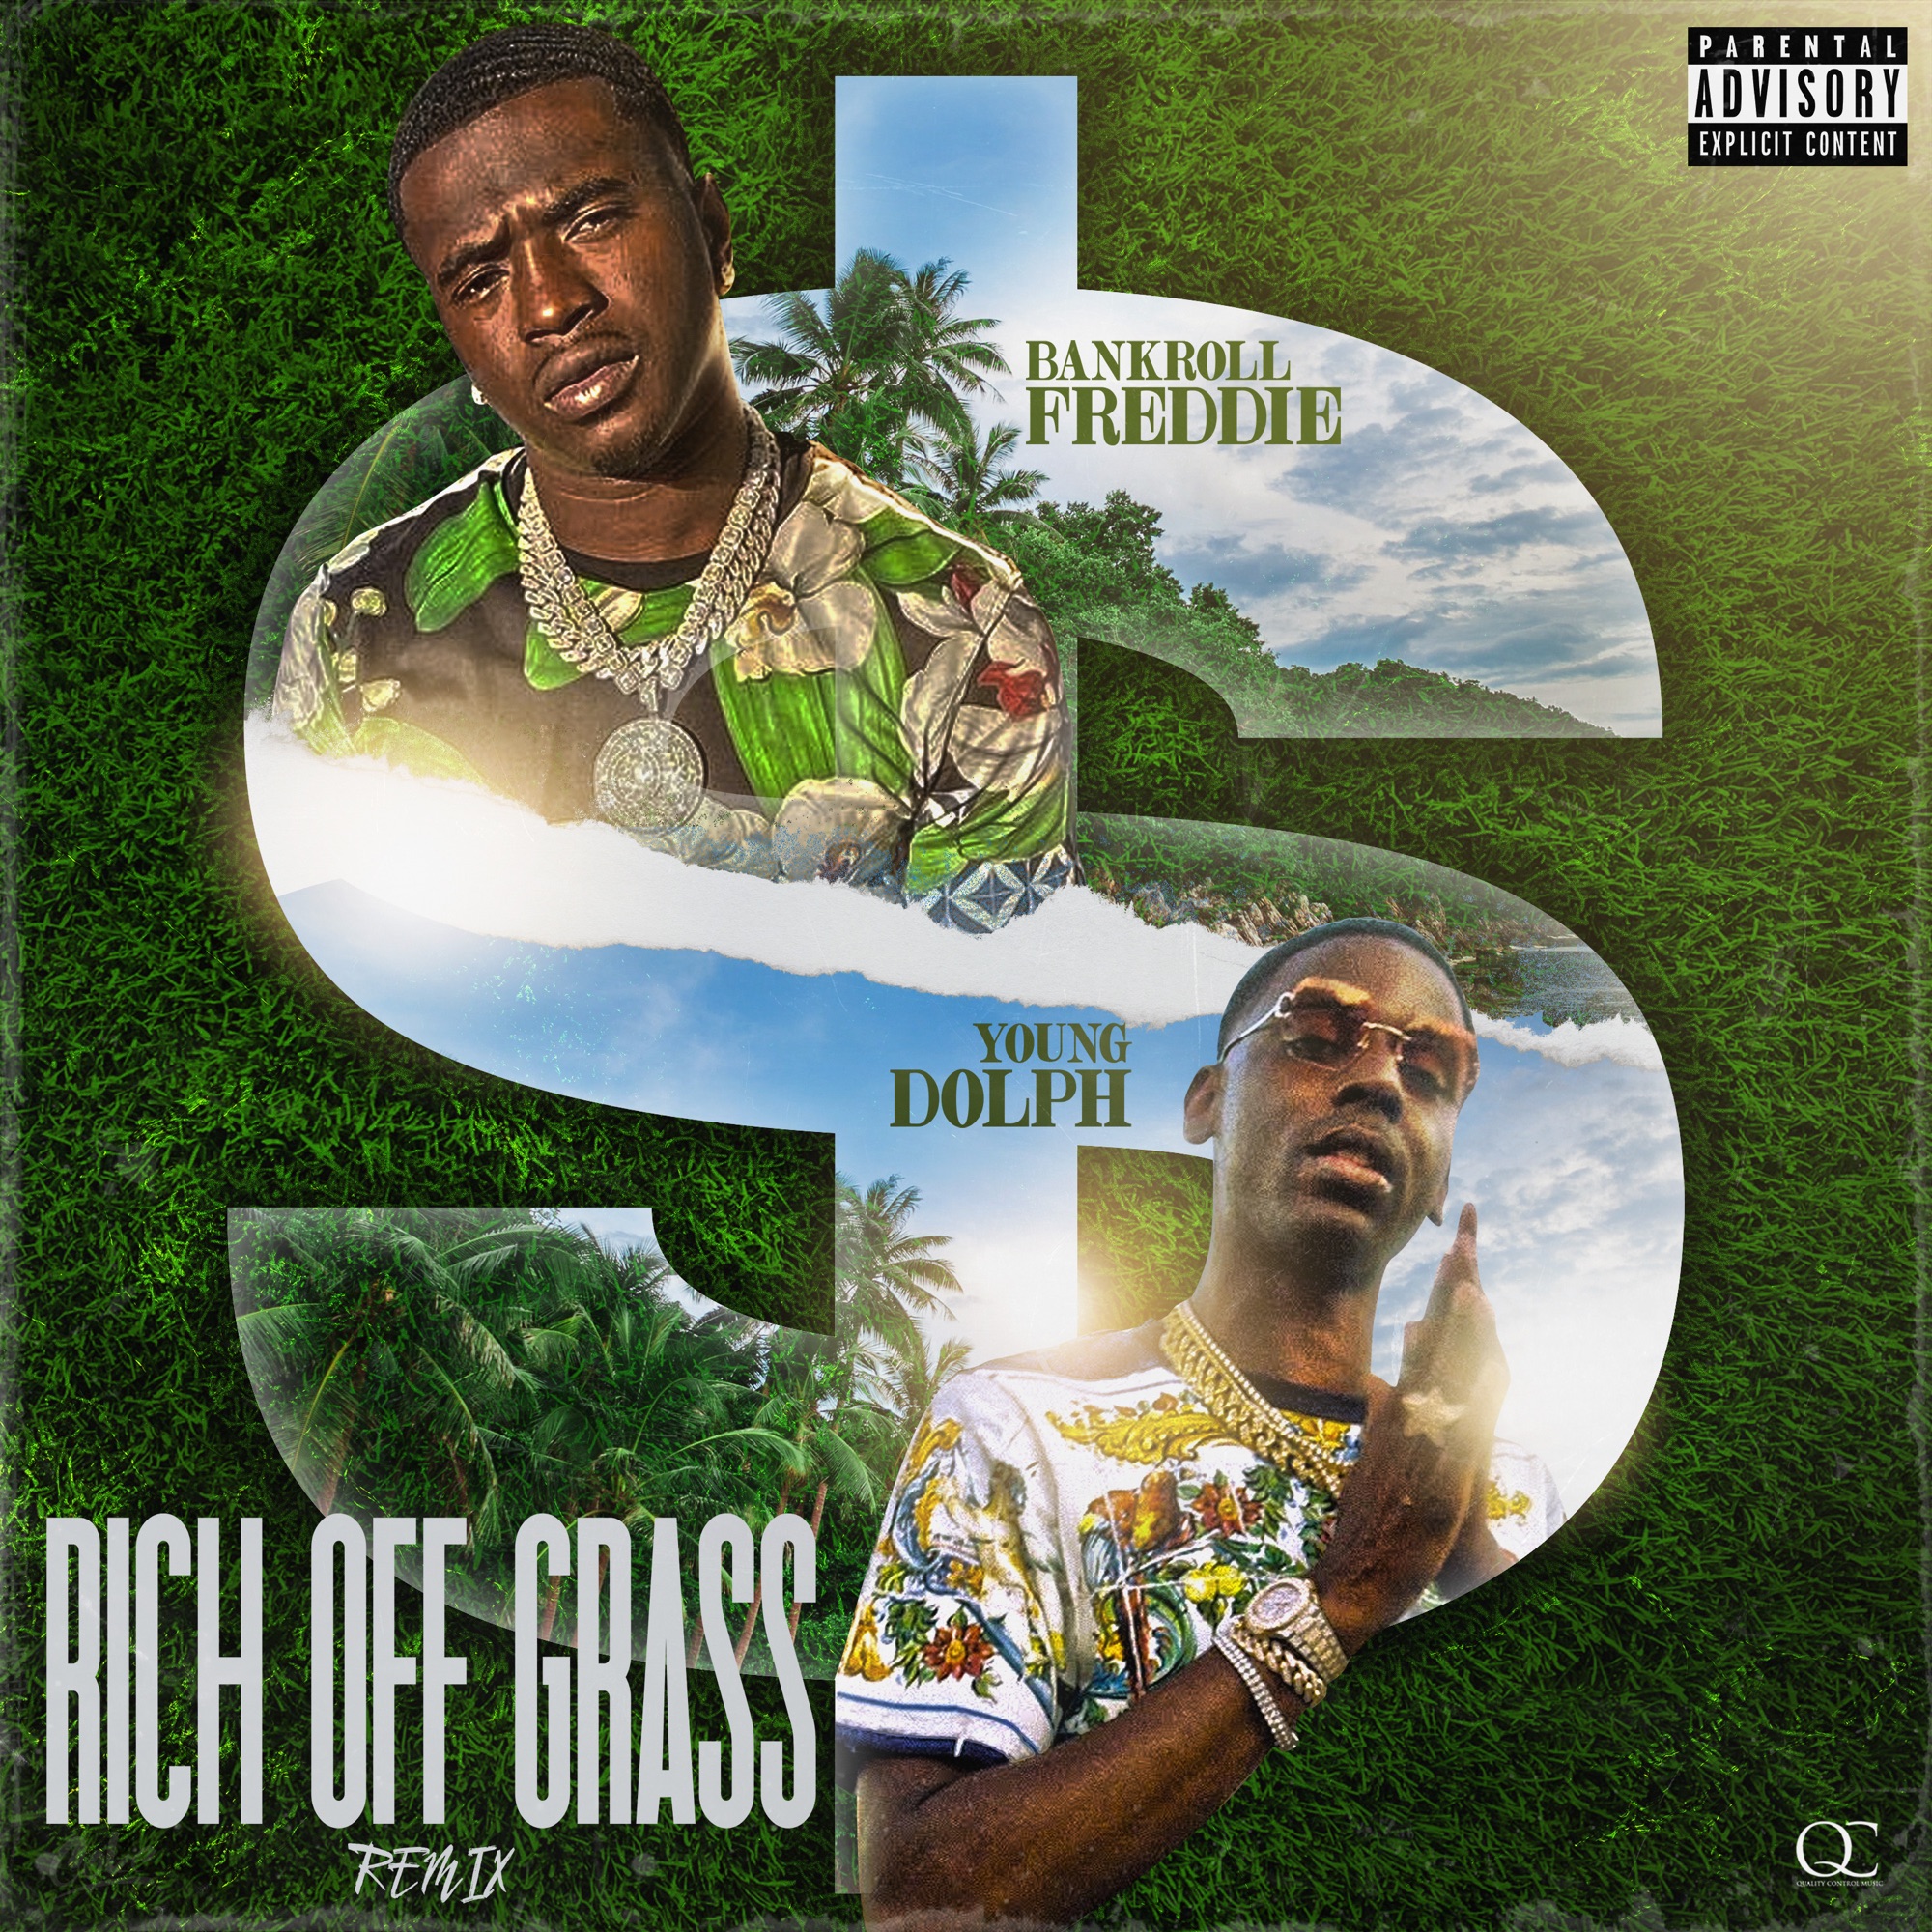 Bankroll Freddie - Rich Off Grass (Remix) [feat. Young Dolph] - Single